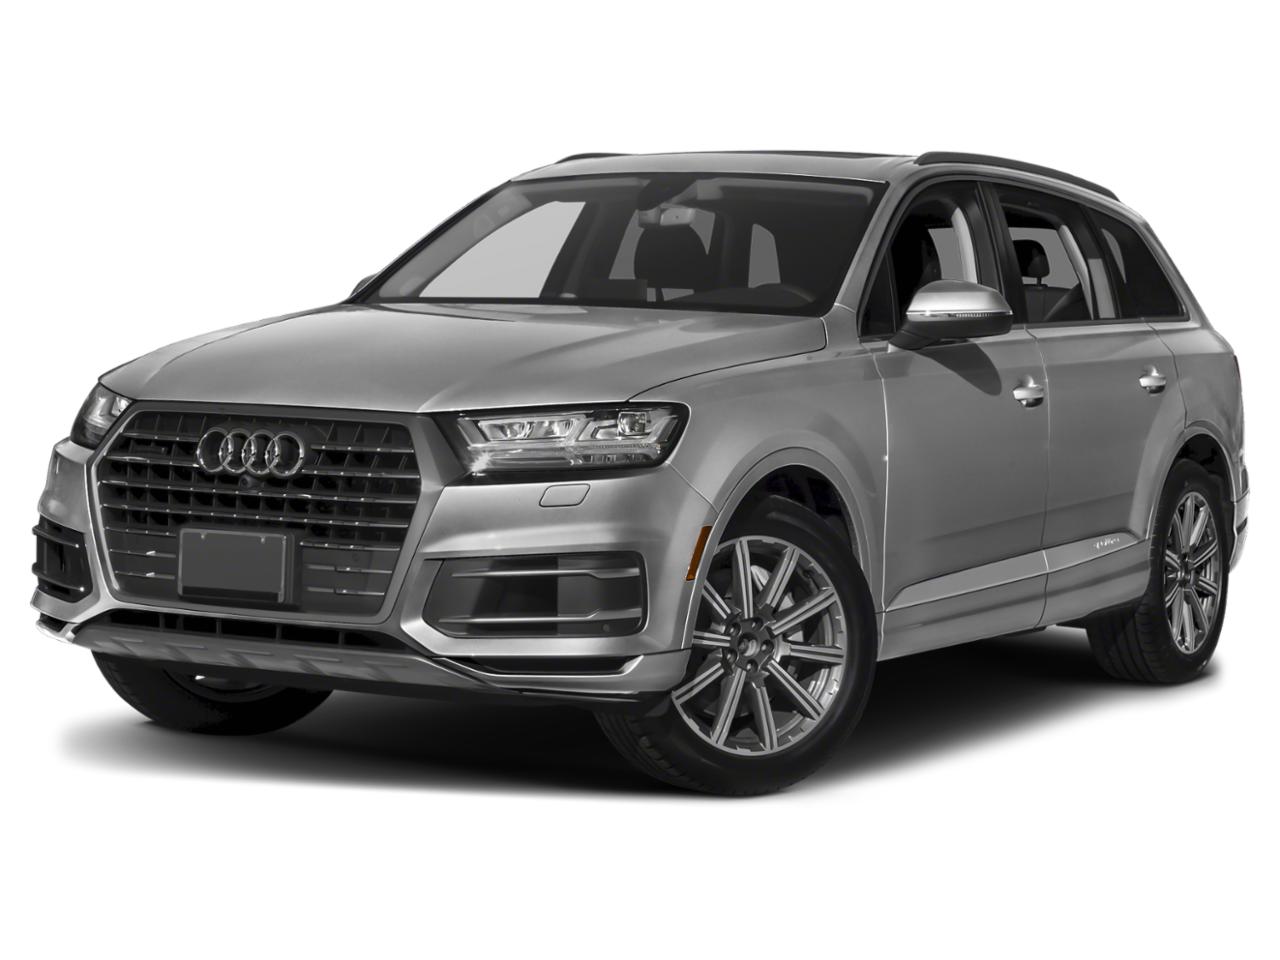 2019 Audi Q7 Vehicle Photo in Willow Grove, PA 19090